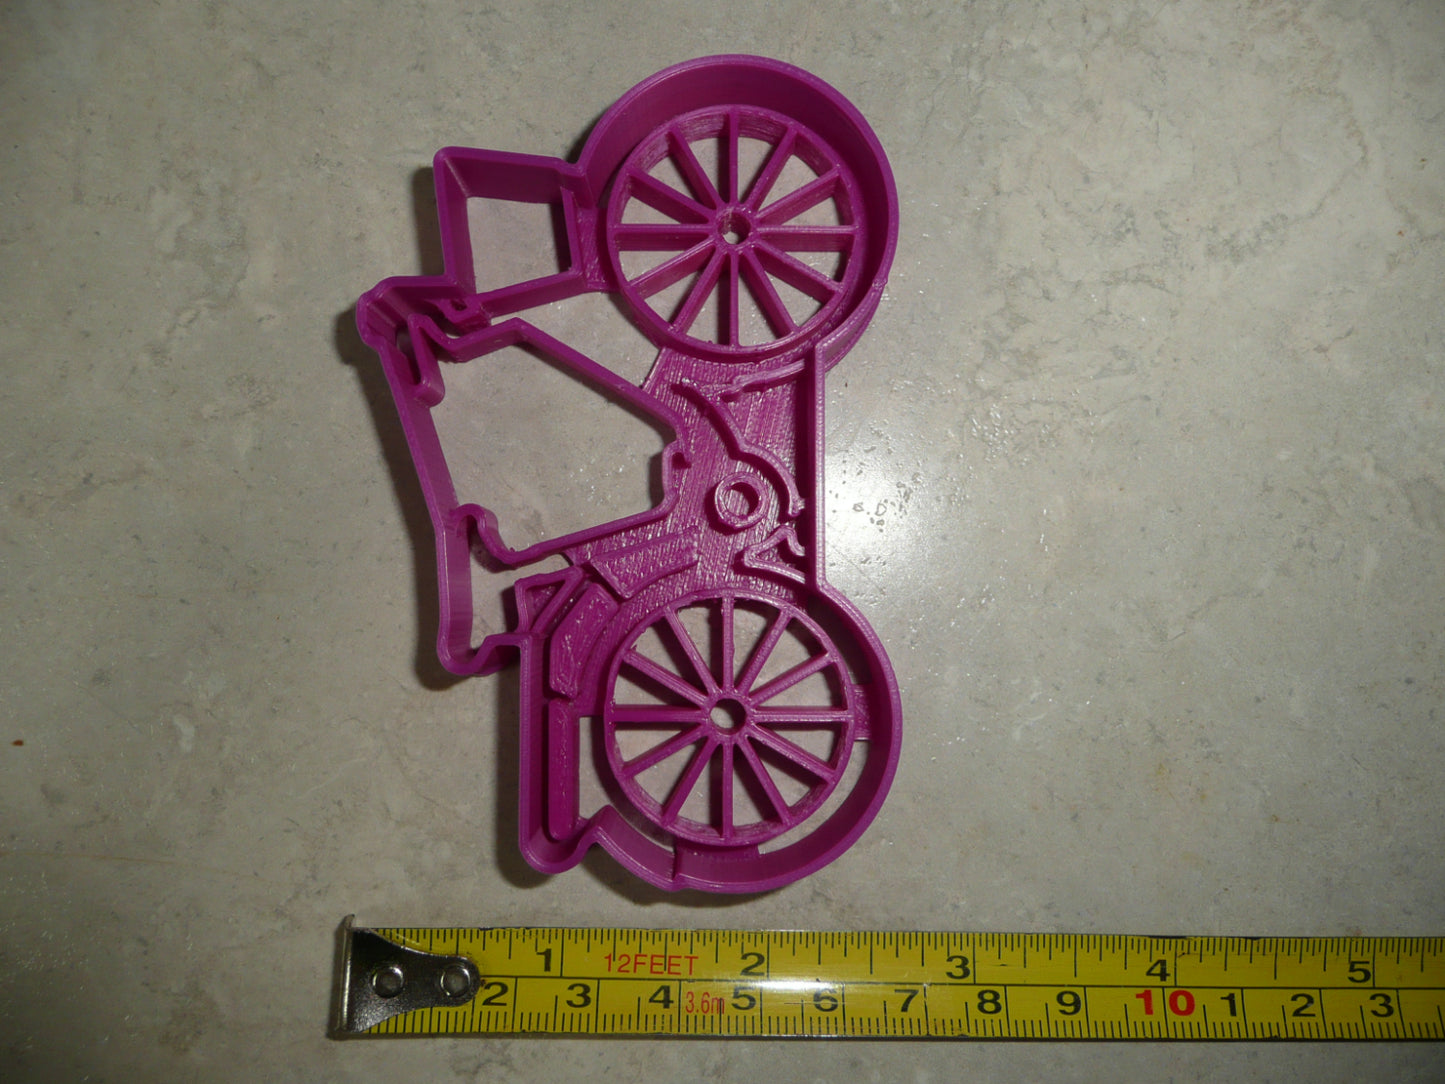 Vintage Retro Cruiser Bike Bicycle With Basket Cookie Cutter Made In USA PR4917